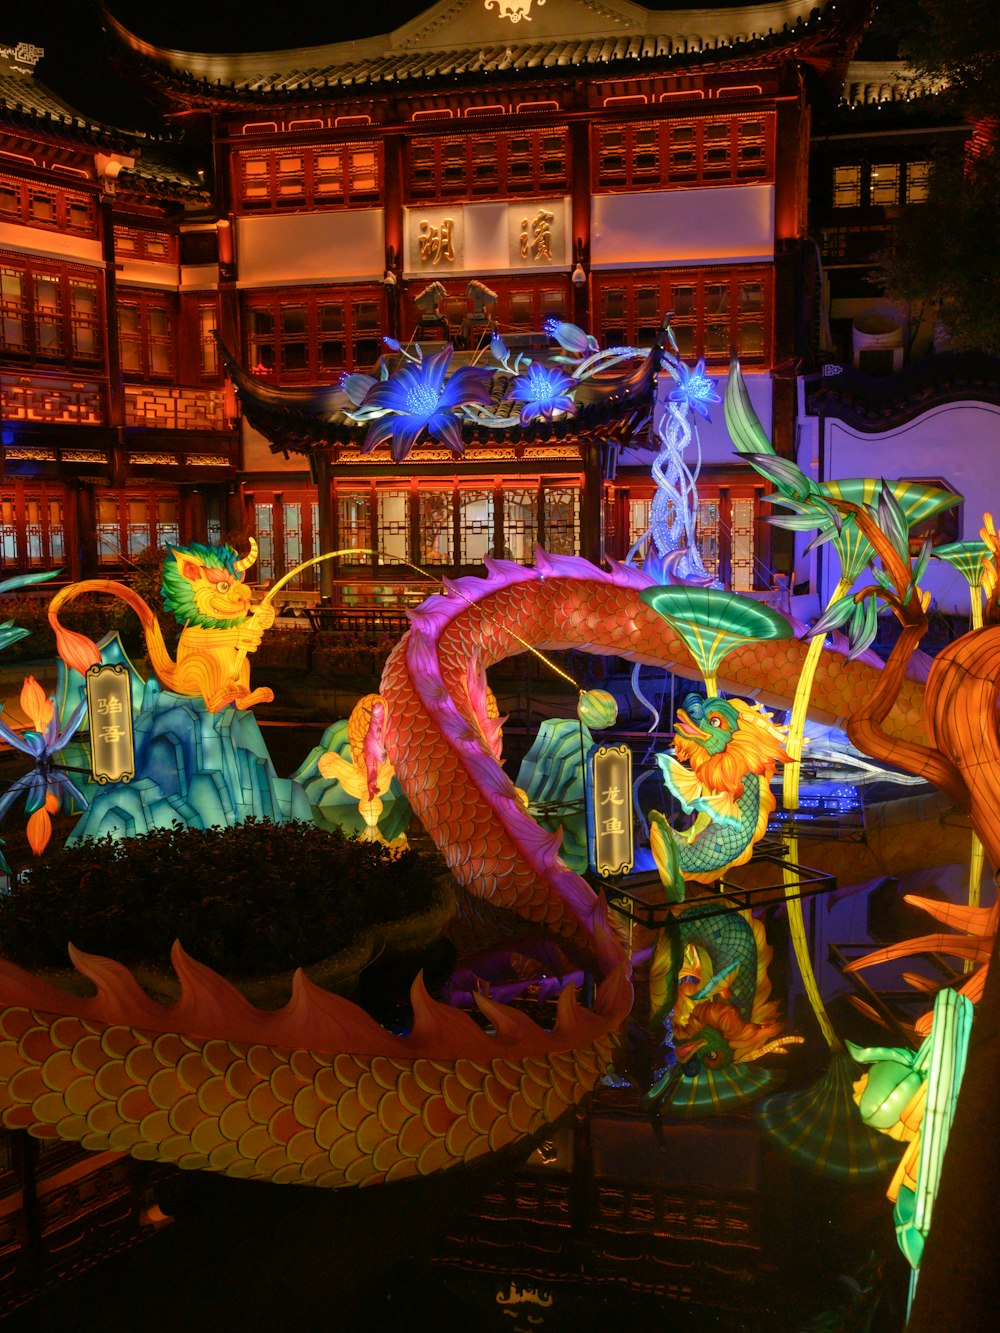 a dragon statue is lit up at night